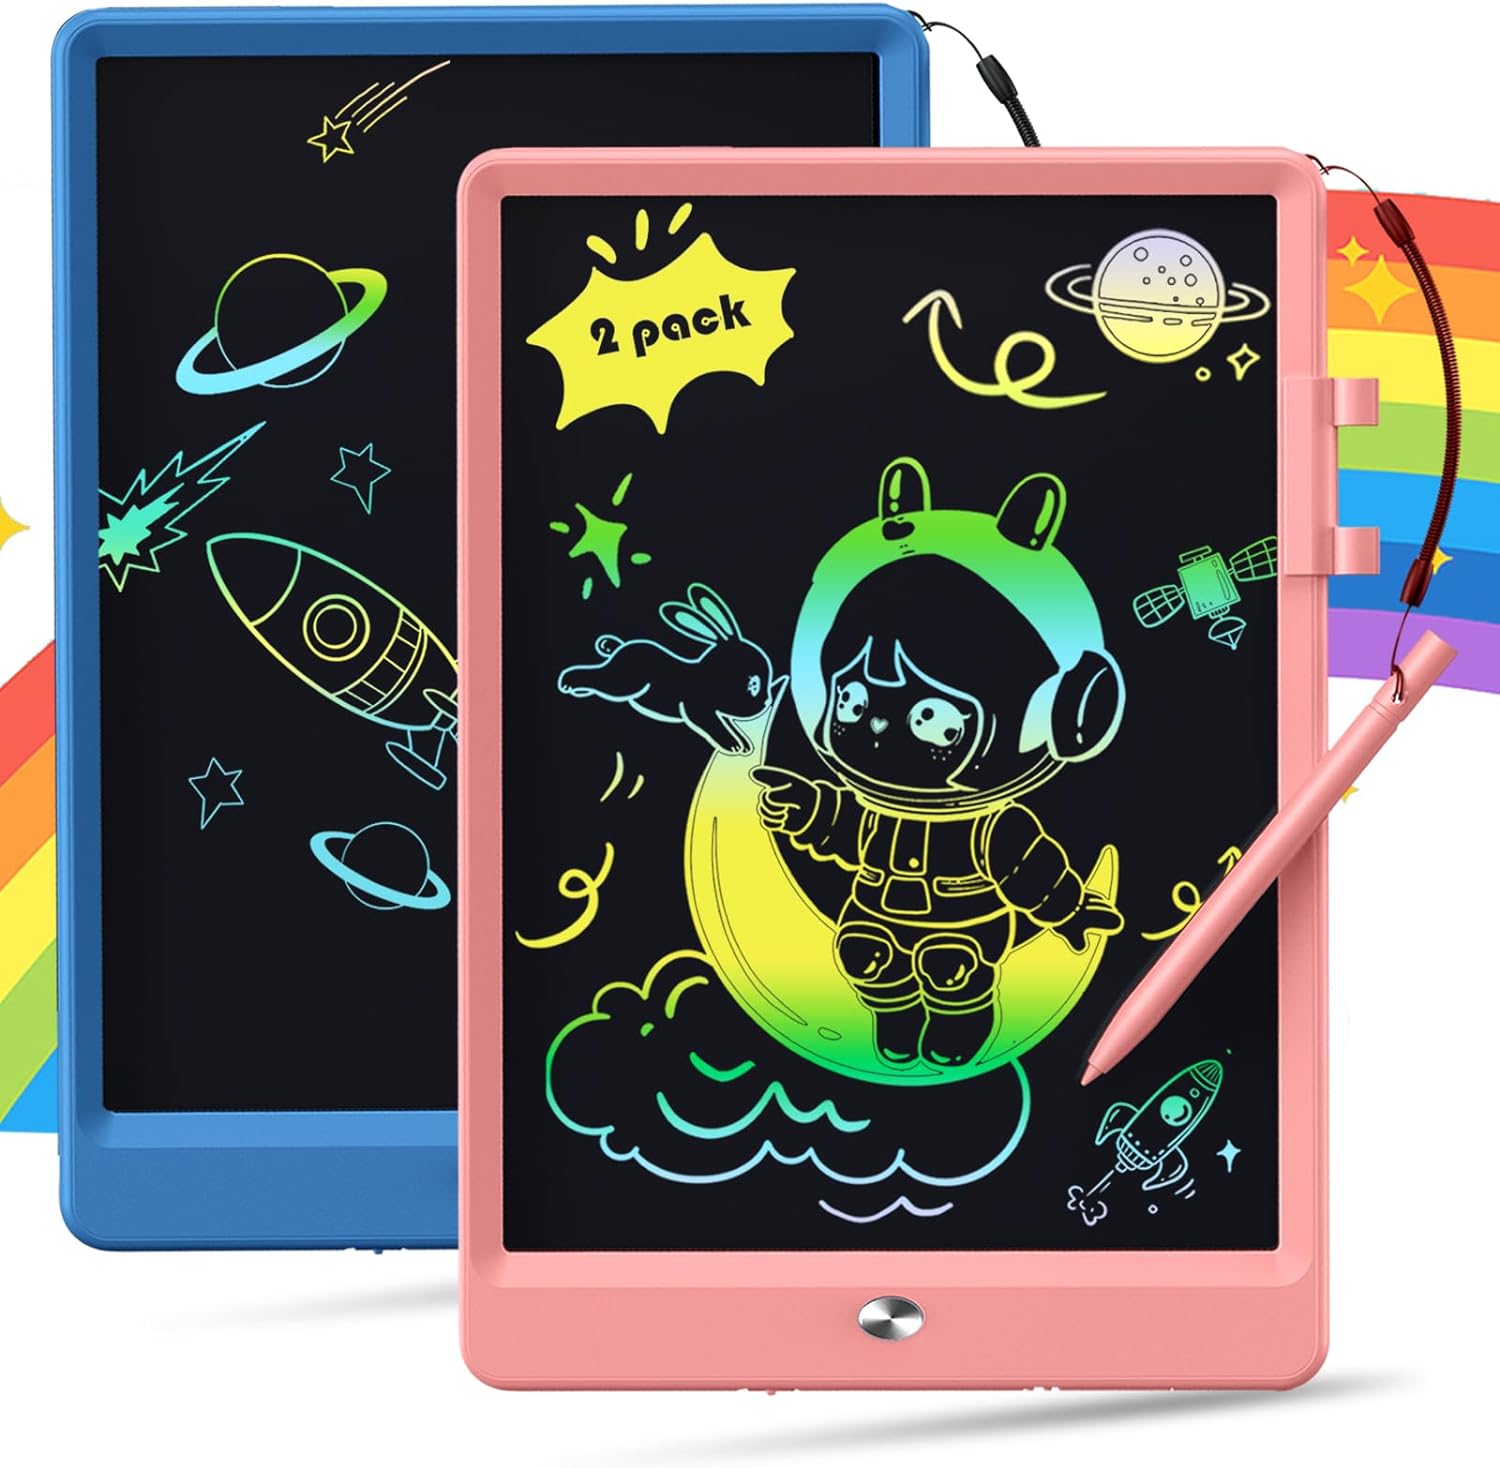 Kidopire 2 Pack LCD Writing Tablet for Kids 10-Inch, Colorful Drawing Tablet Kids Doodle Board, Educational Toddler Toy Aged 2-4 5 6, Drawing Pad for Kids 3+ Year Old Boys Girls Birthday Gifts